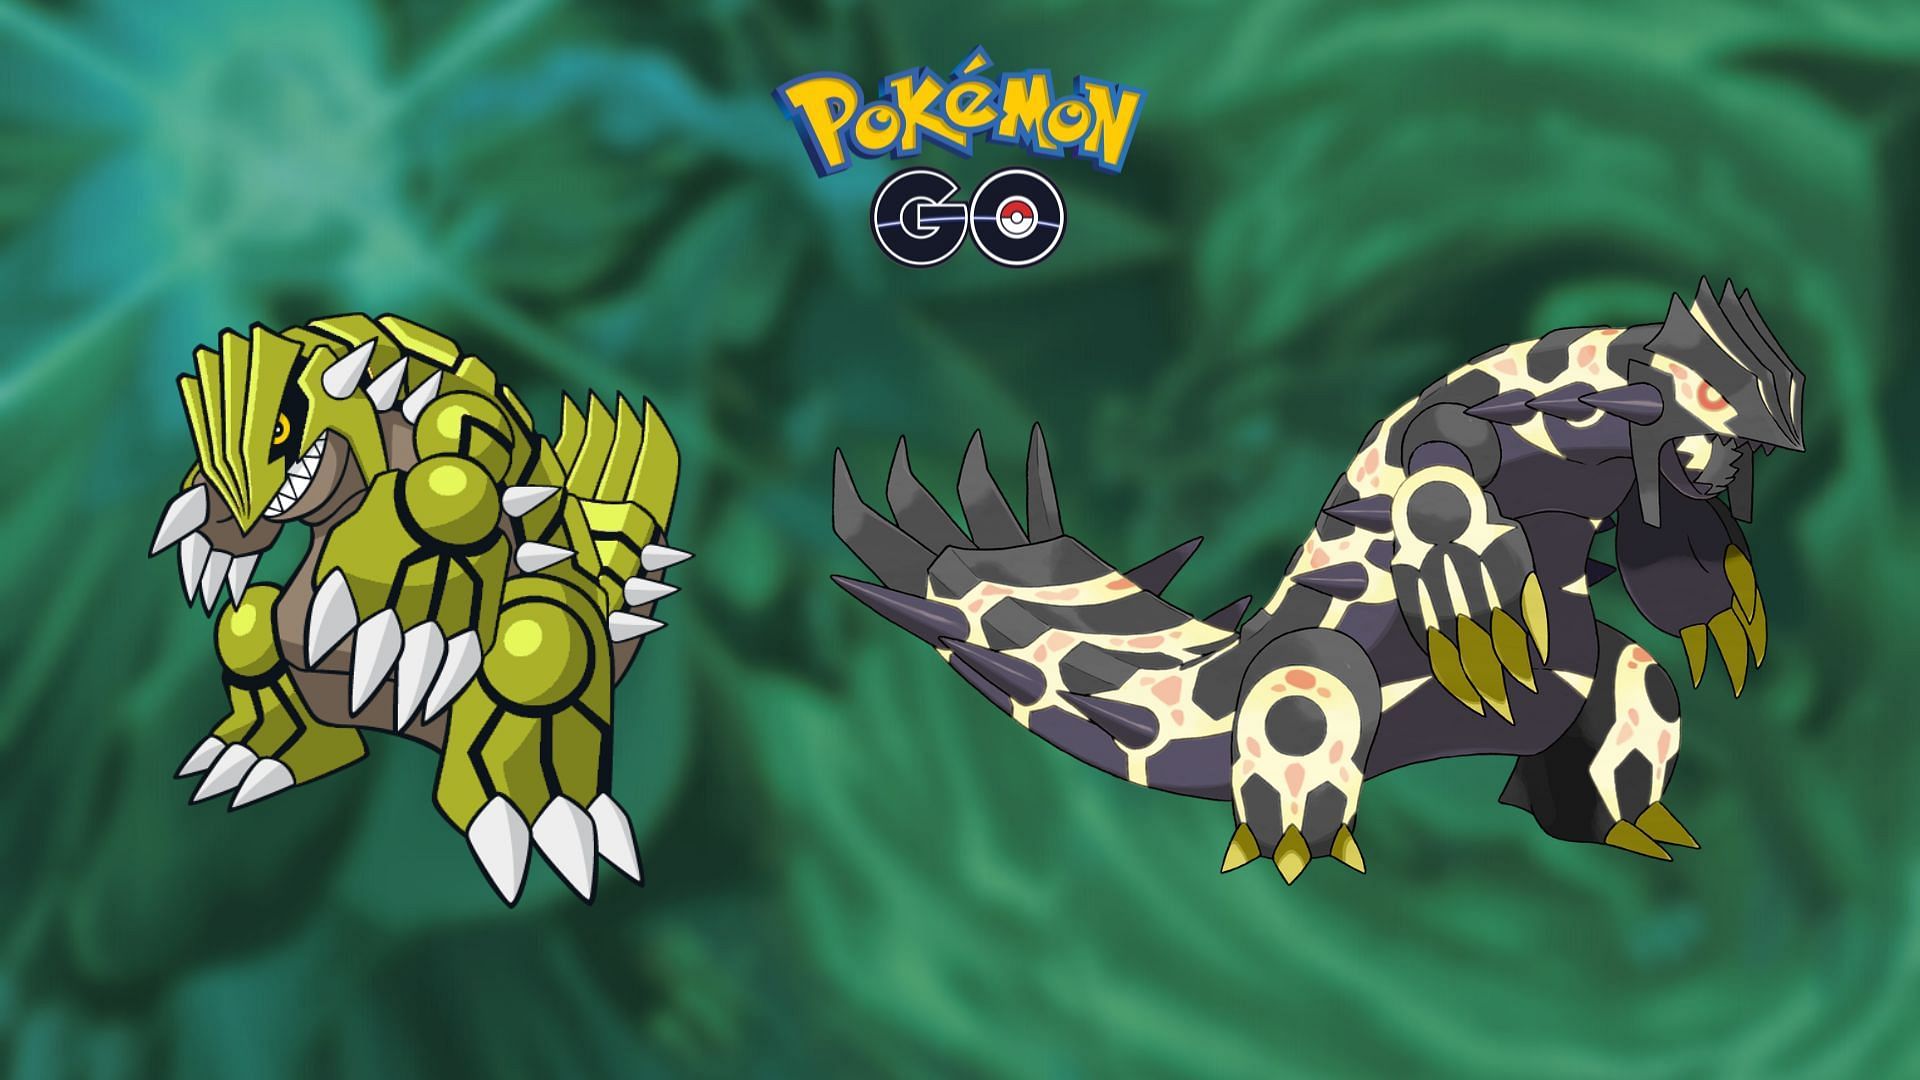 Shiny Groudon and Shiny Primal Groudon as seen in the game (Image via Sportskeeda)